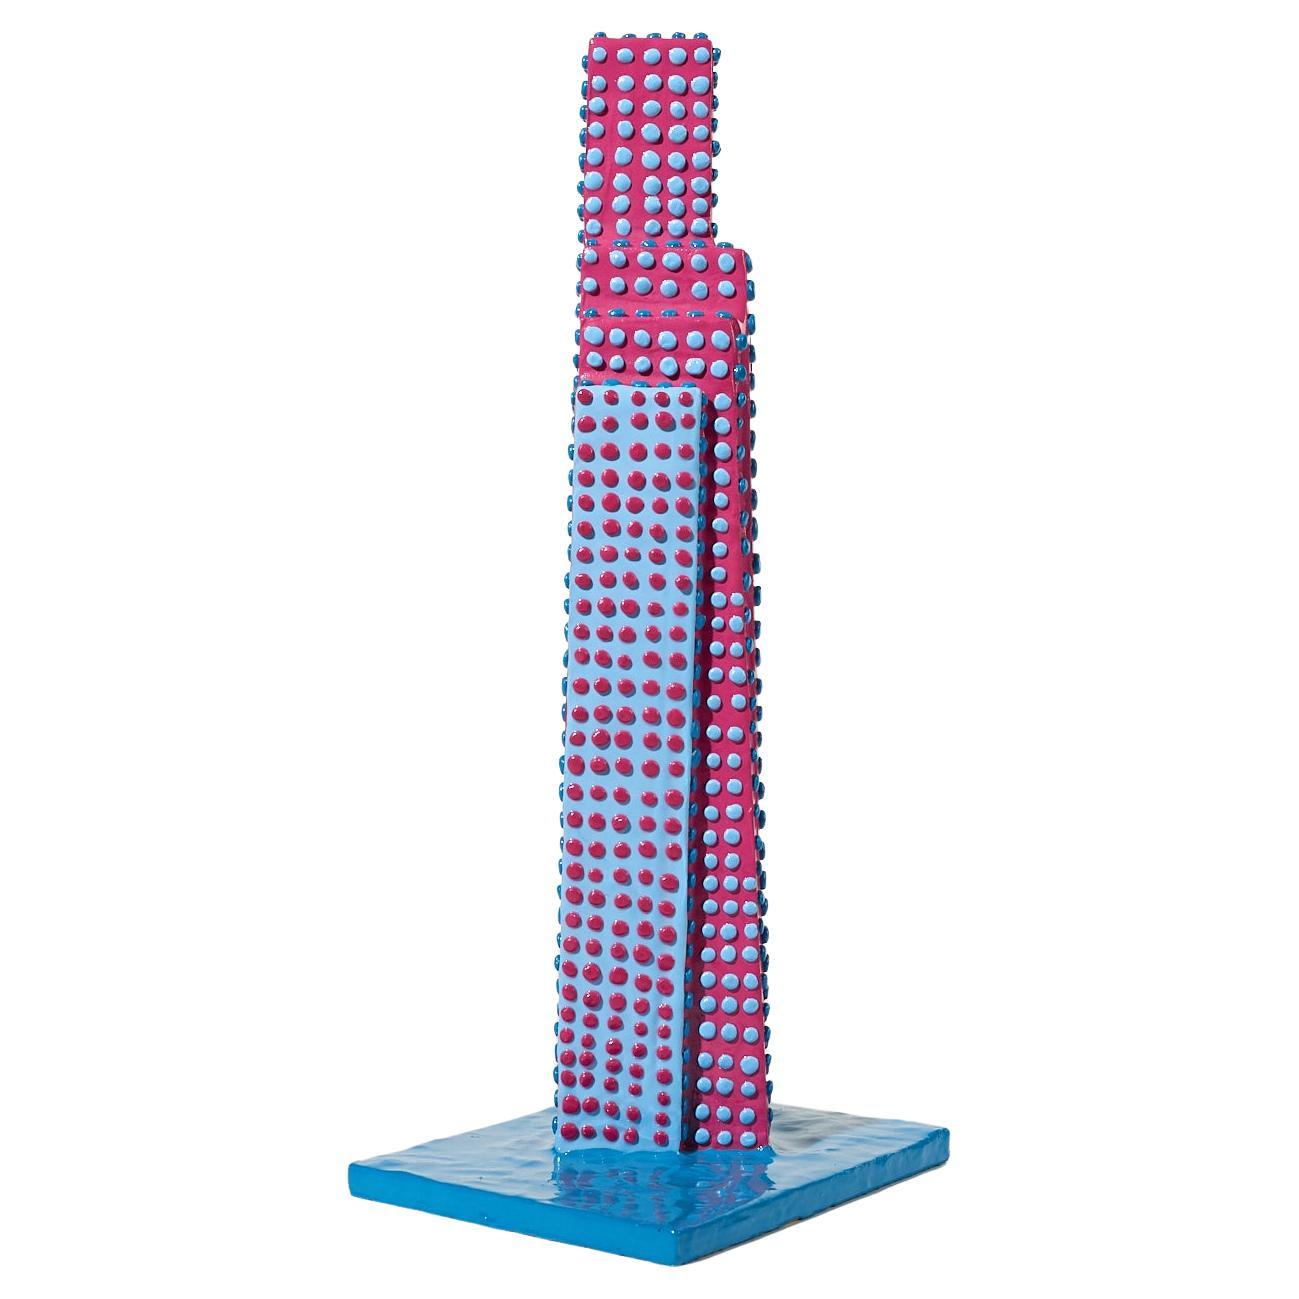 Decorative City Towers by Diego Faivre Minute Manufacture Designs